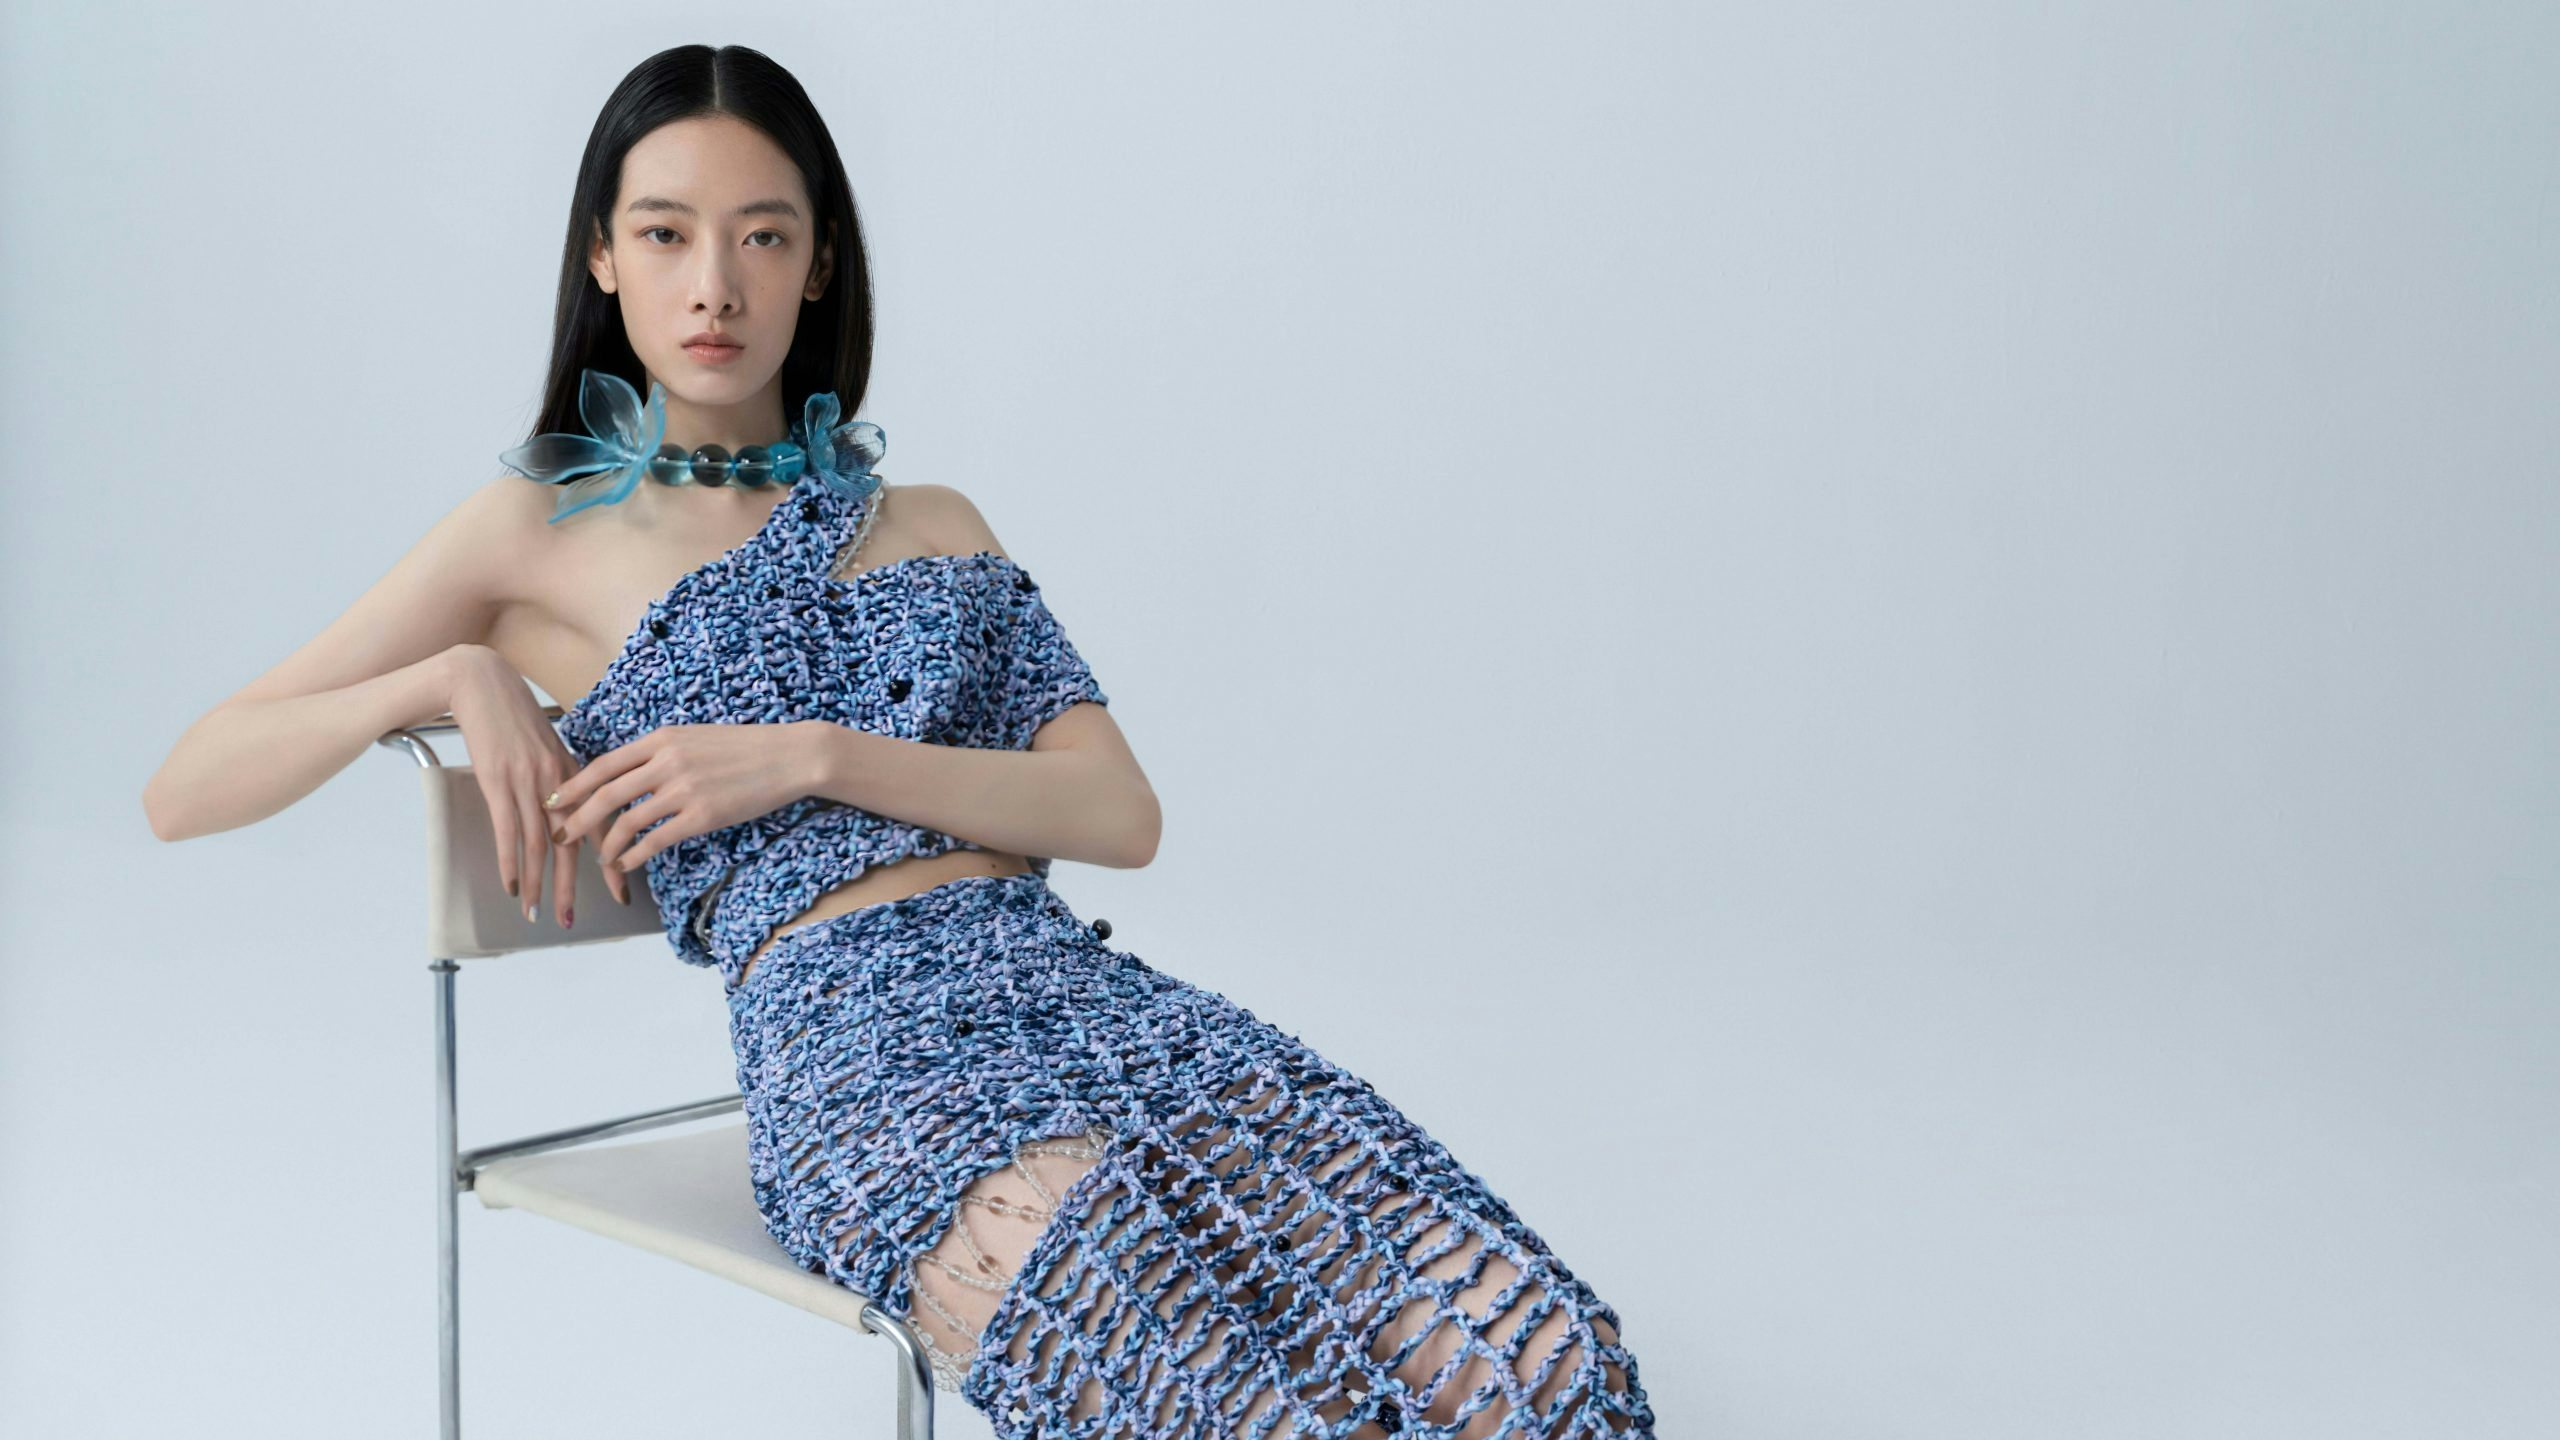 Chinese shoppers are slated to help luxury sales rebound. But for luxury players like LVMH and Mytheresa, connecting with those valuable consumers also means investing in local talent. Photo: Mytheresa 